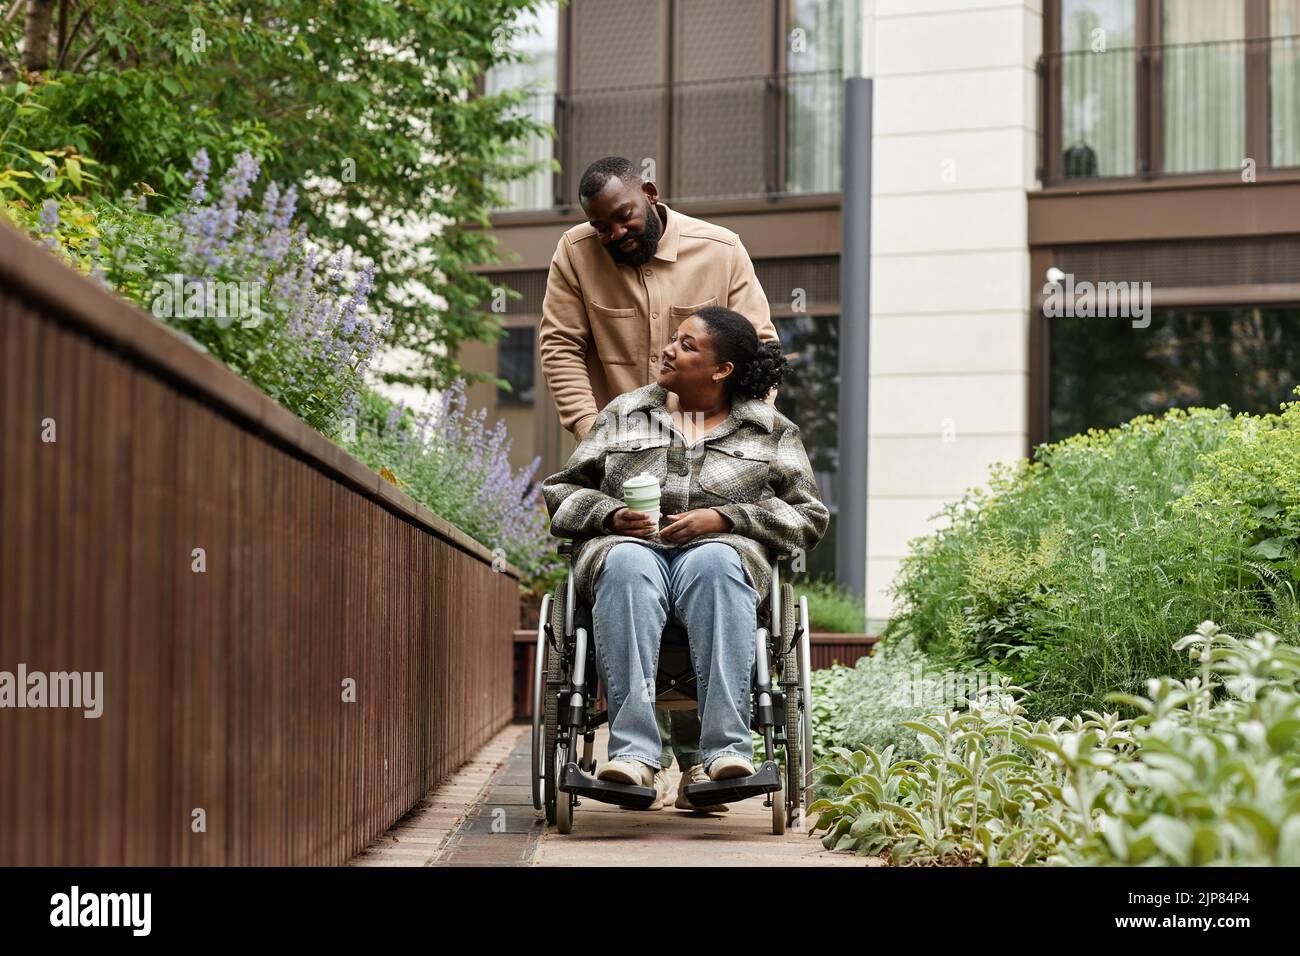 Full length portrait of black couple with young woman in wheelchair enjoying walk in city garden and looking at each other, copy space Stock Photo